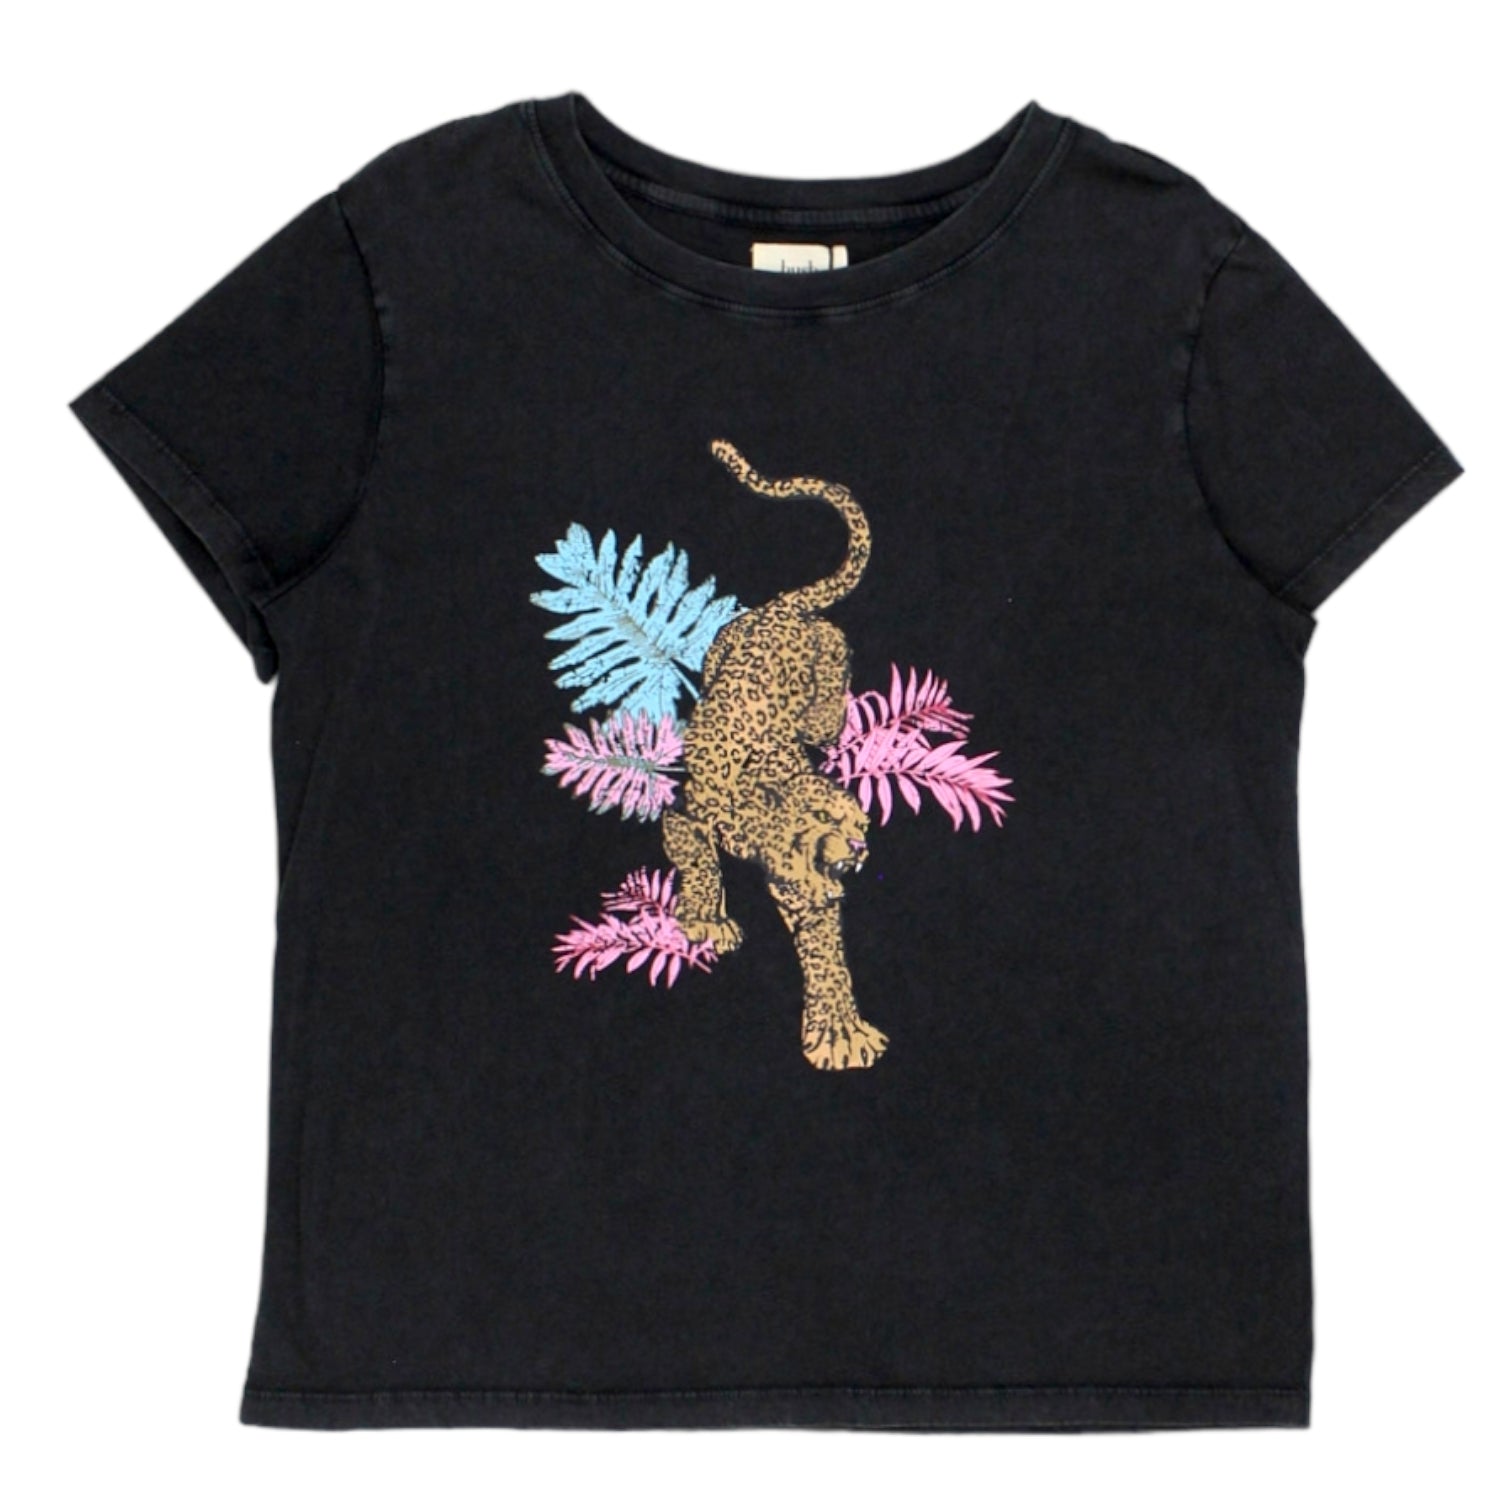 Hush Washed Black Roar Leopard Relaxed T-Shirt